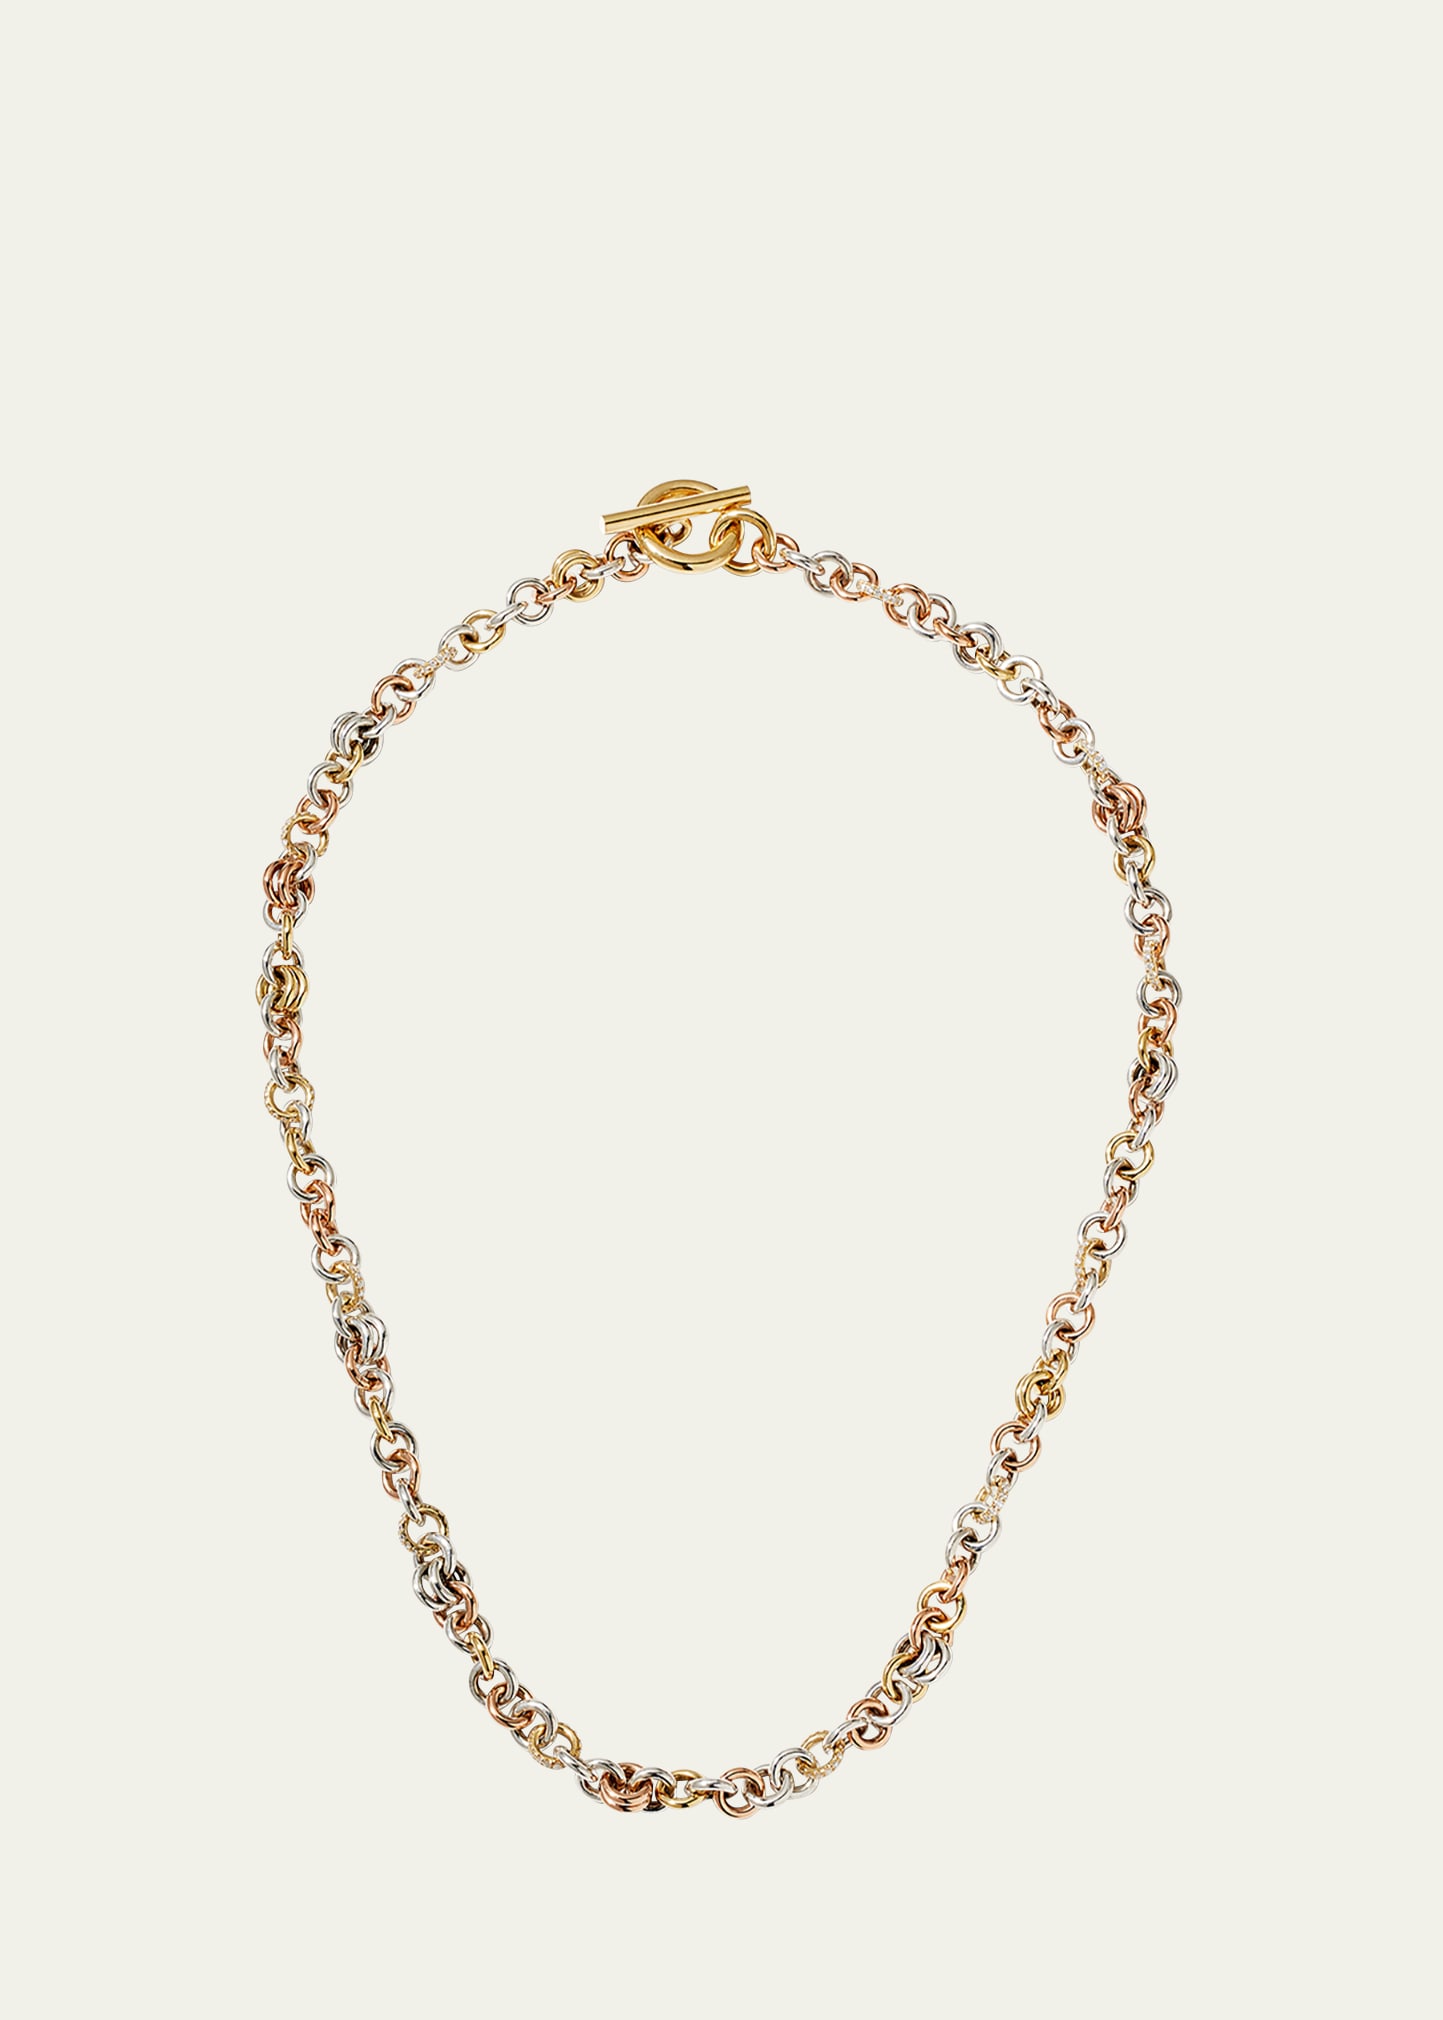 Serpens MX Pave Necklace with Multi-Link Chain and Pave Diamonds